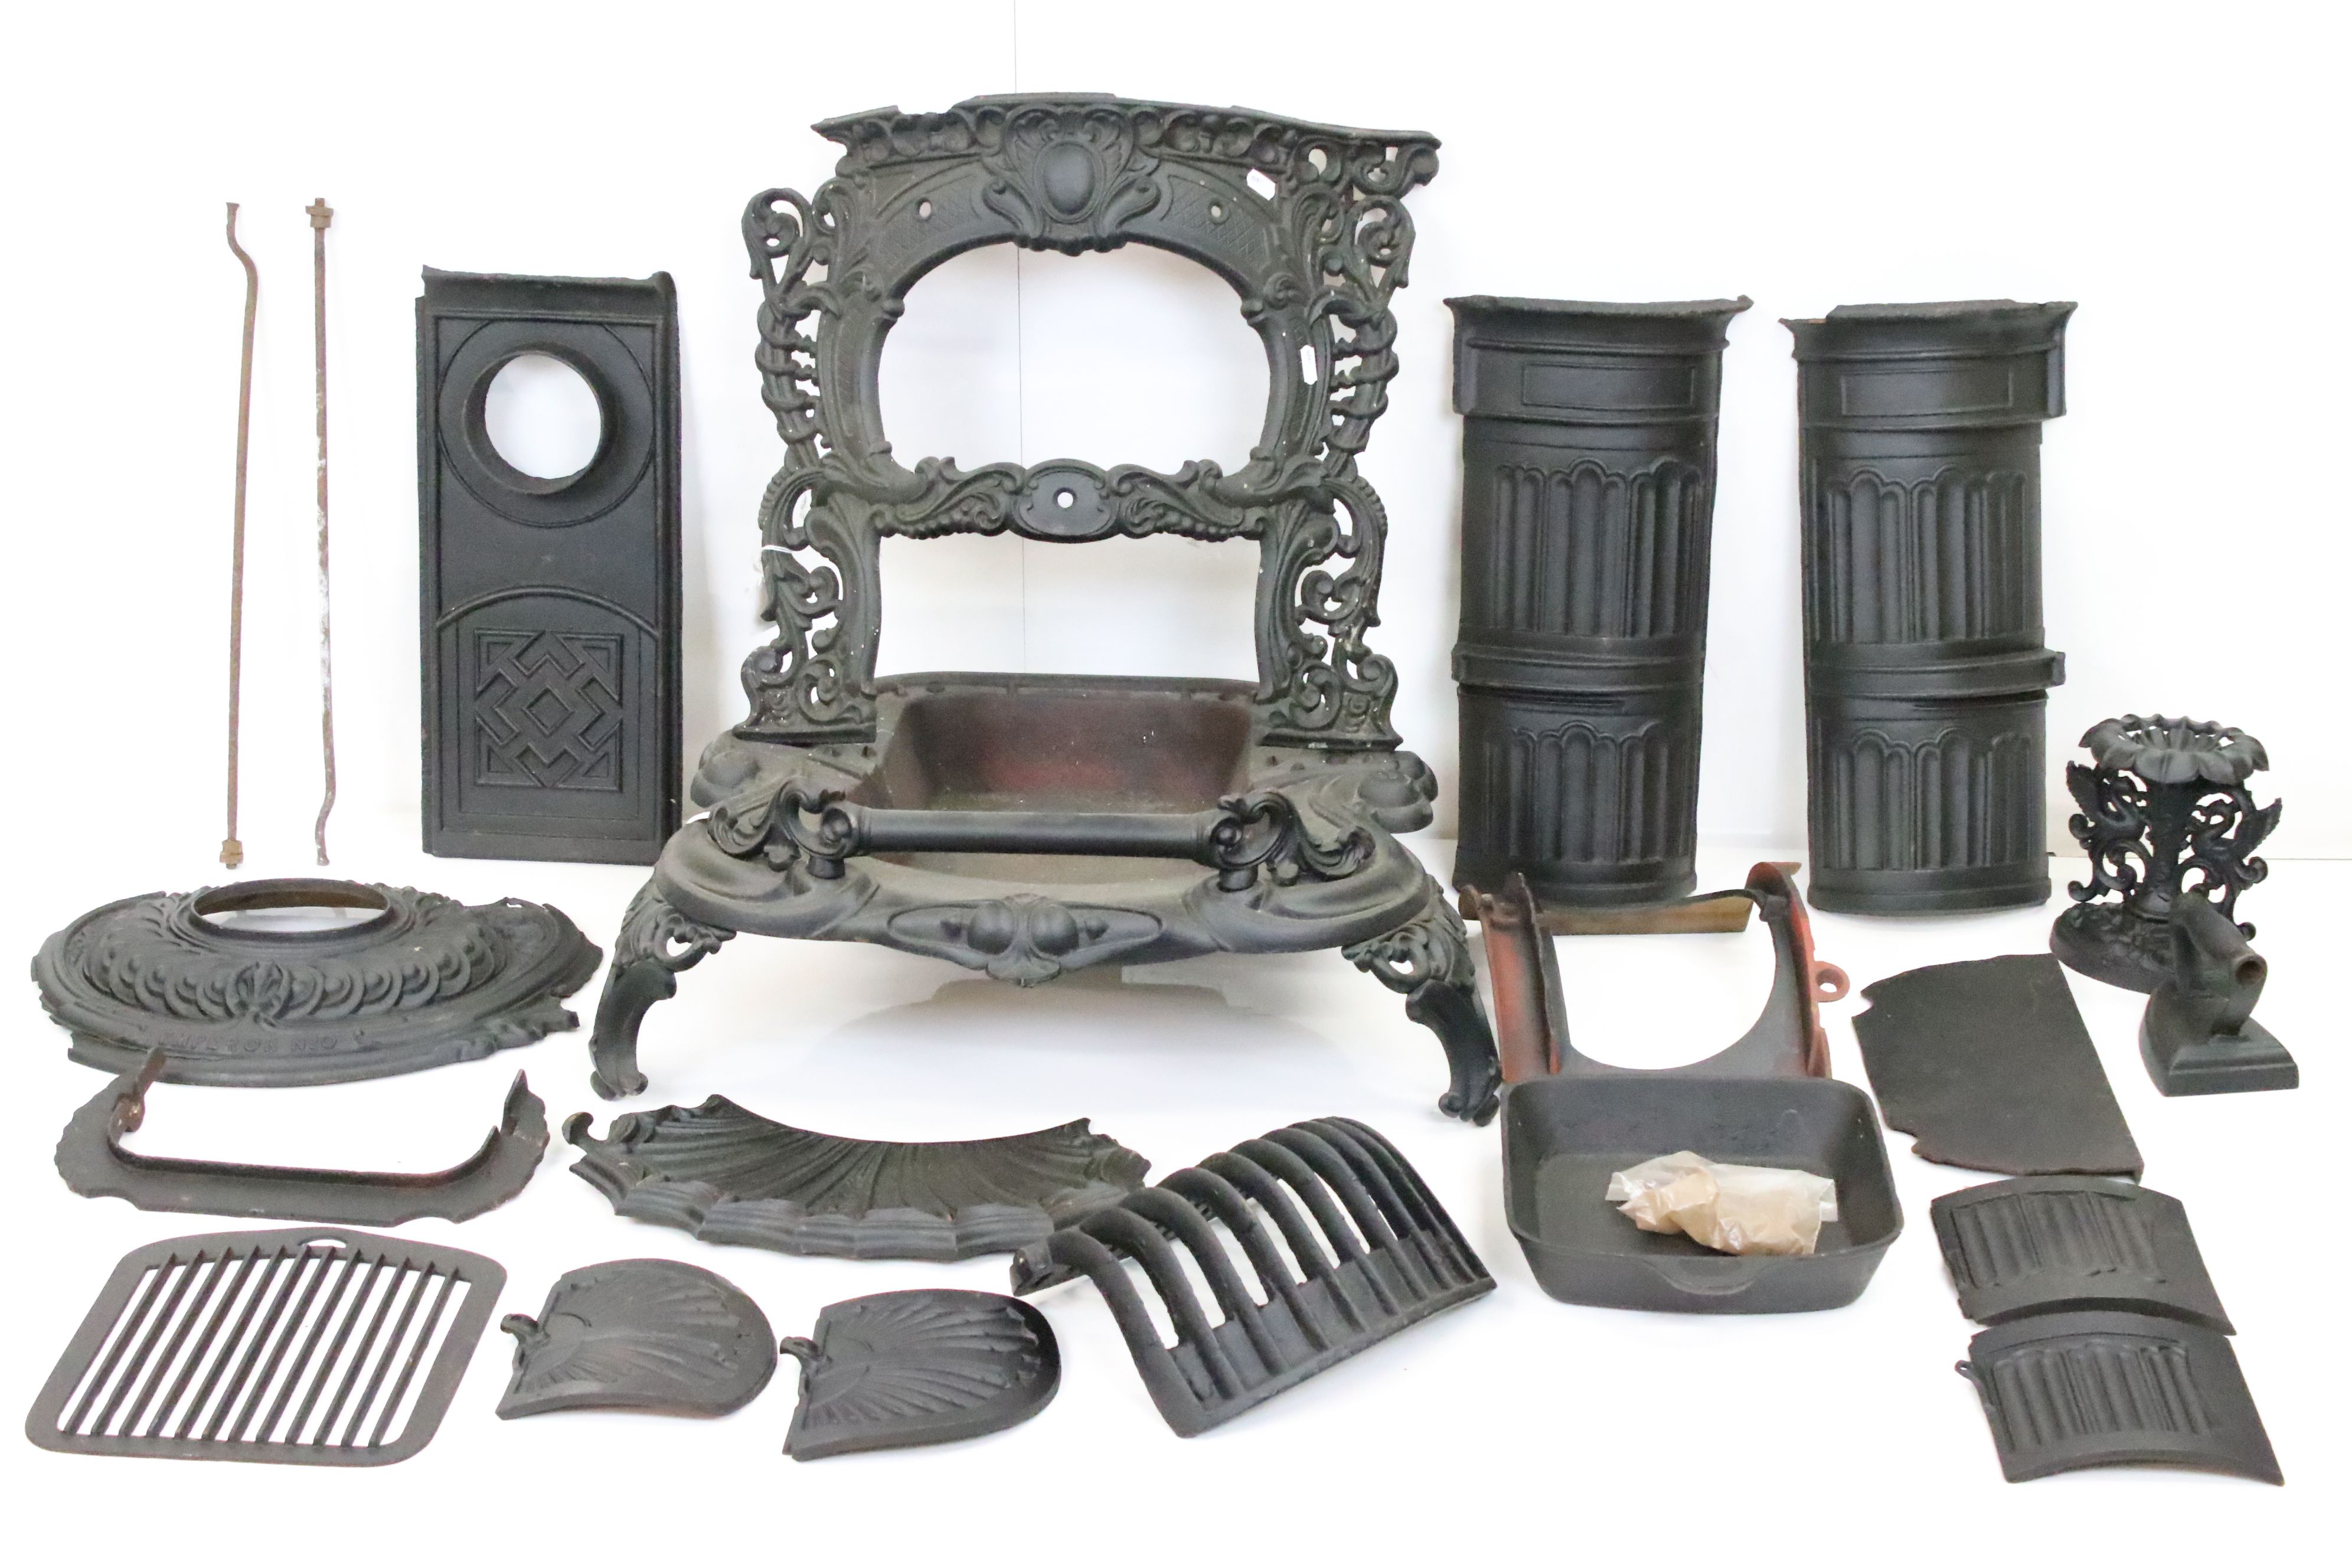 Collection of Reproduction Victorian Metal Fire Grates and accessories - Image 2 of 12